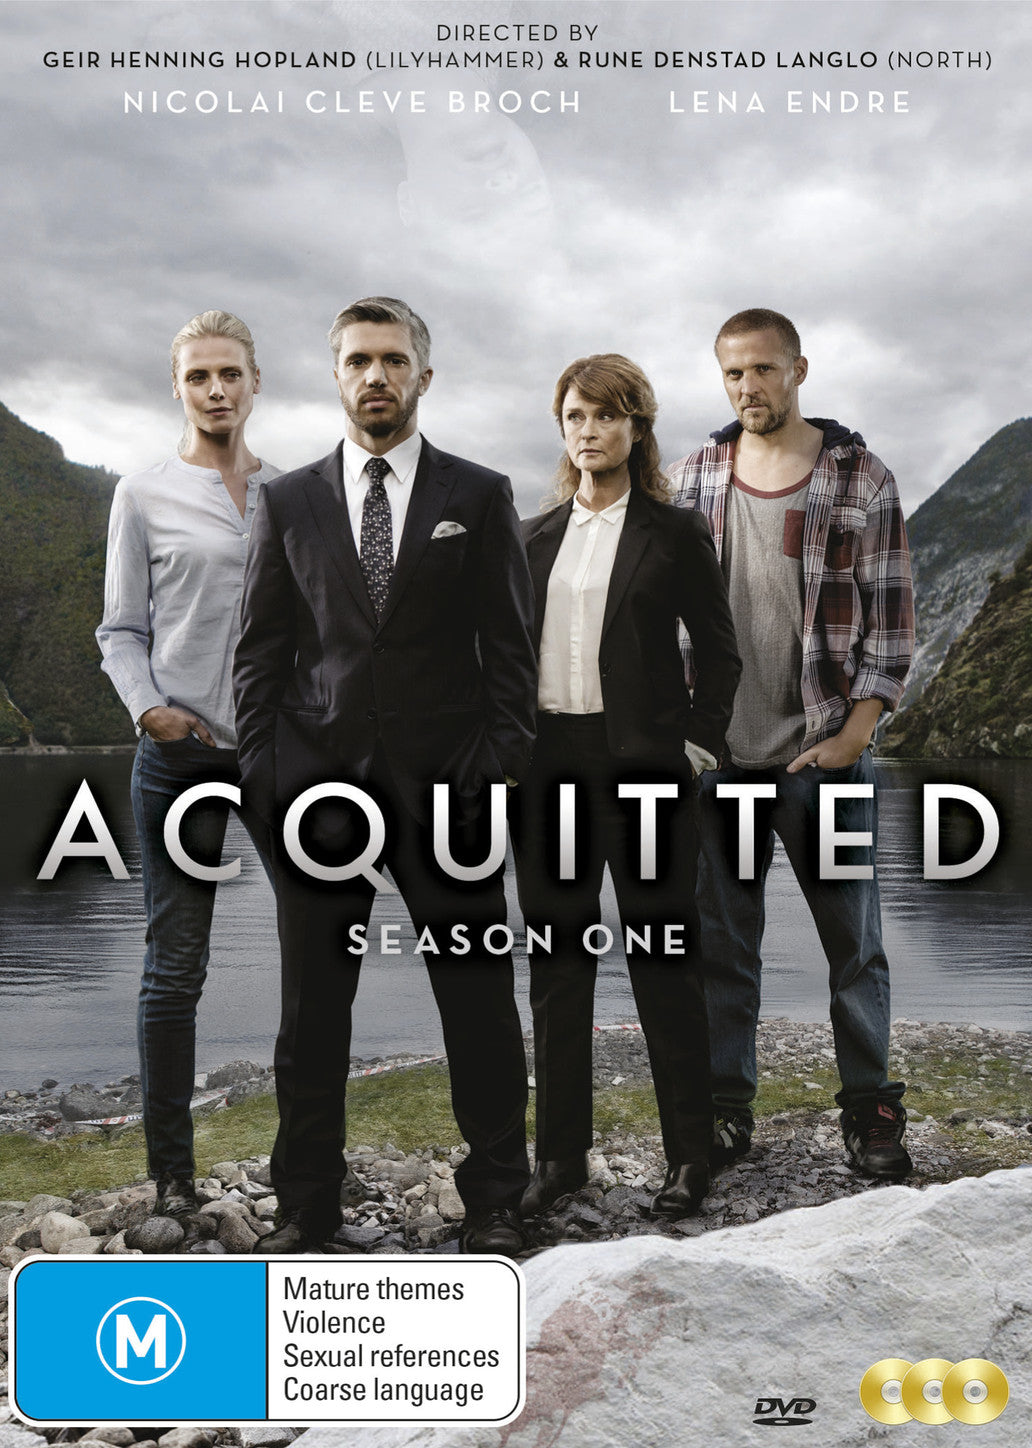 ACQUITTED SEASON 1